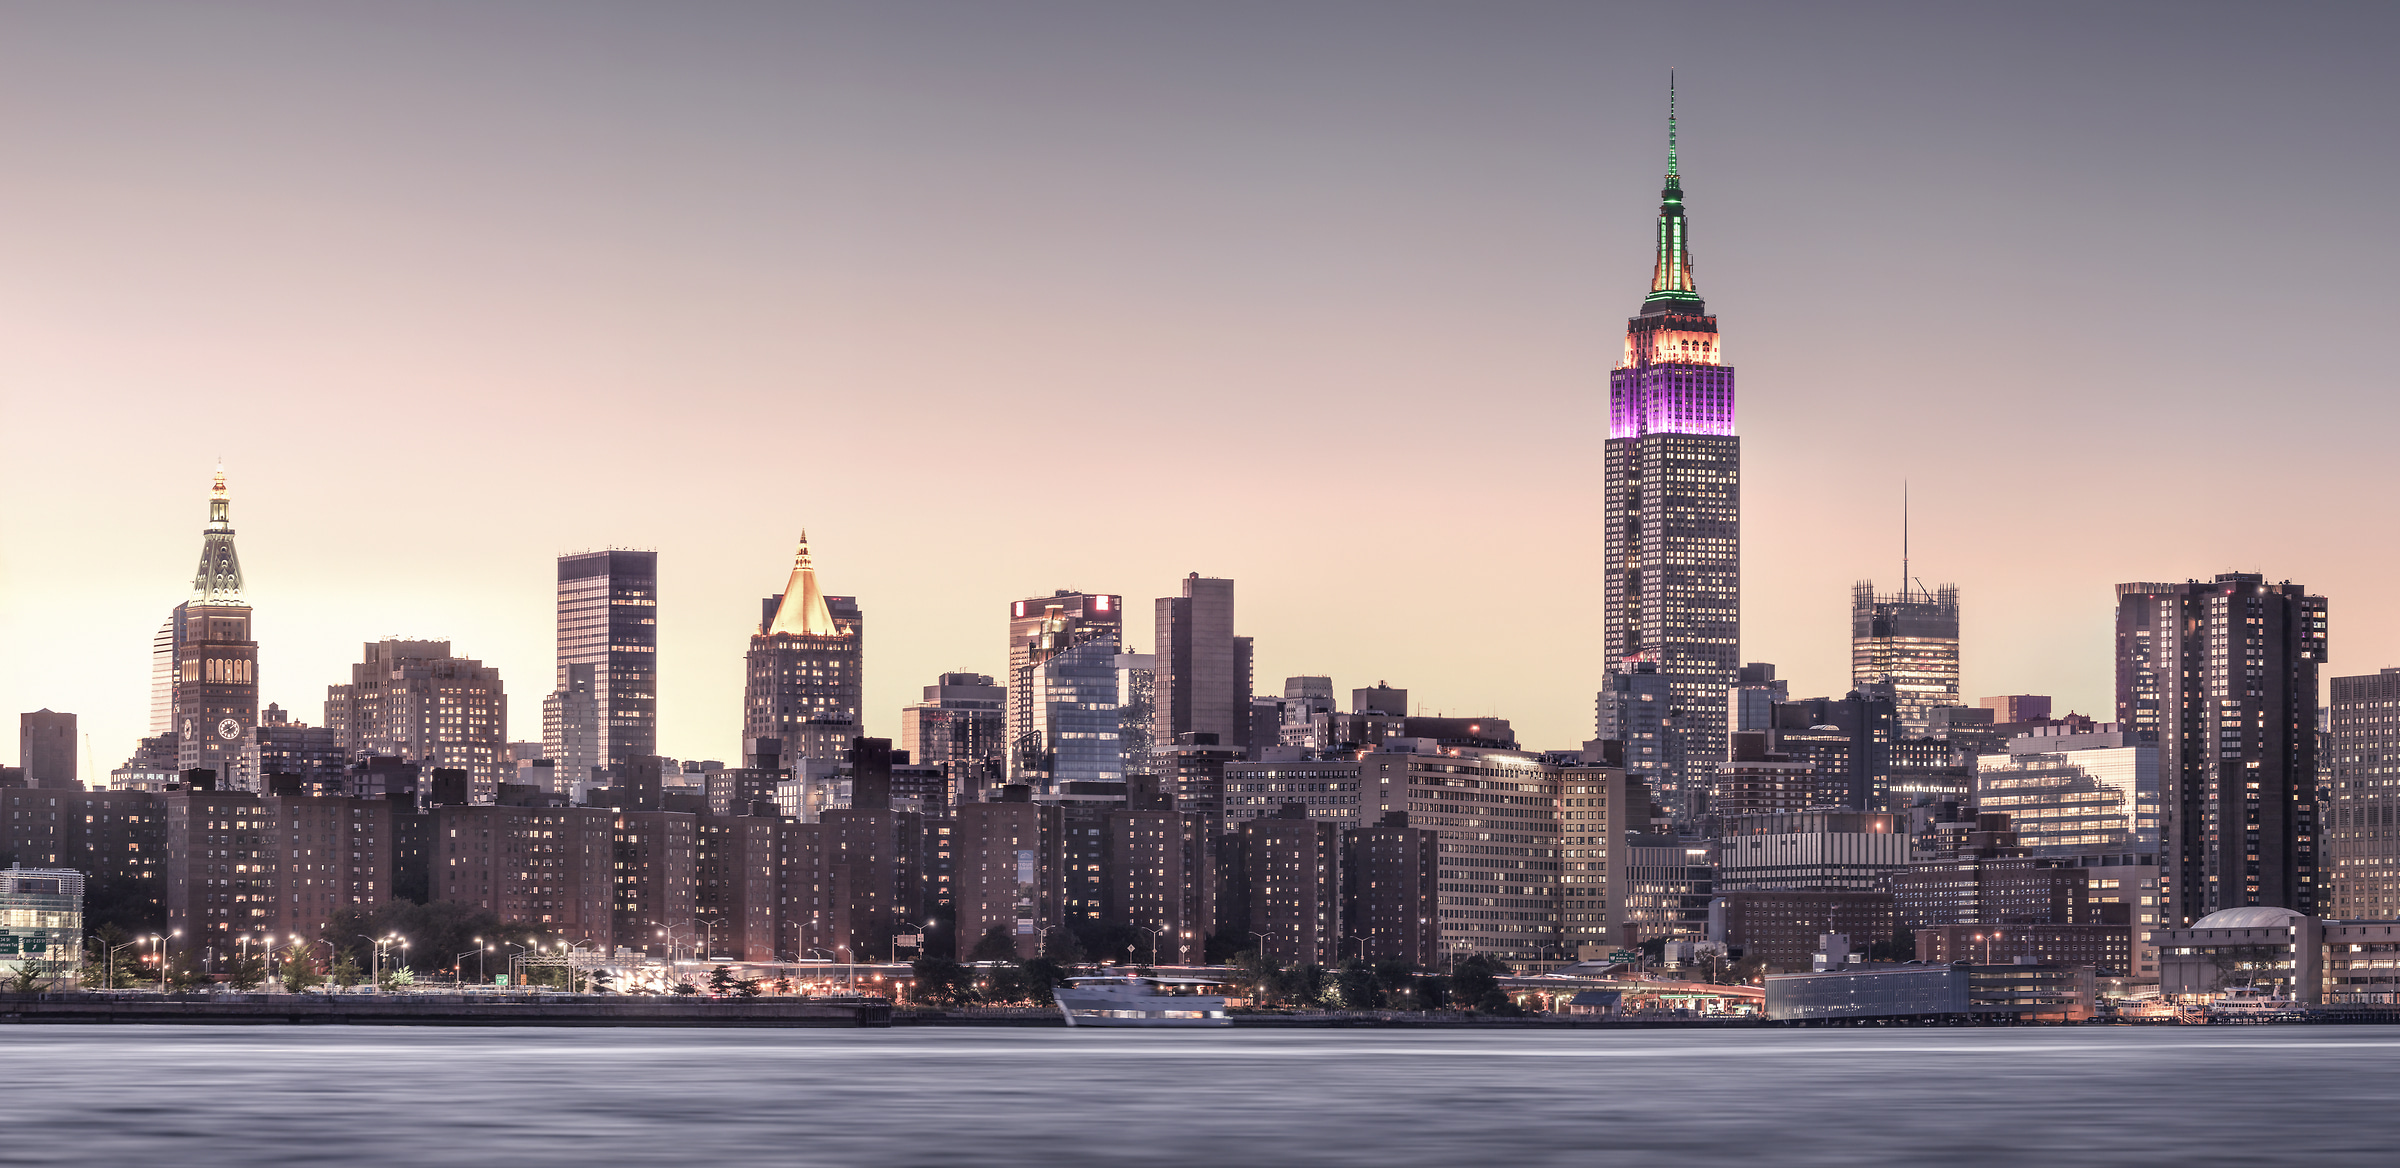 482 megapixels! Ultra high resolution cityscape VAST photo of the Empire State Building and Manhattan skyline at sunset in NYC; created by Dan Piech.